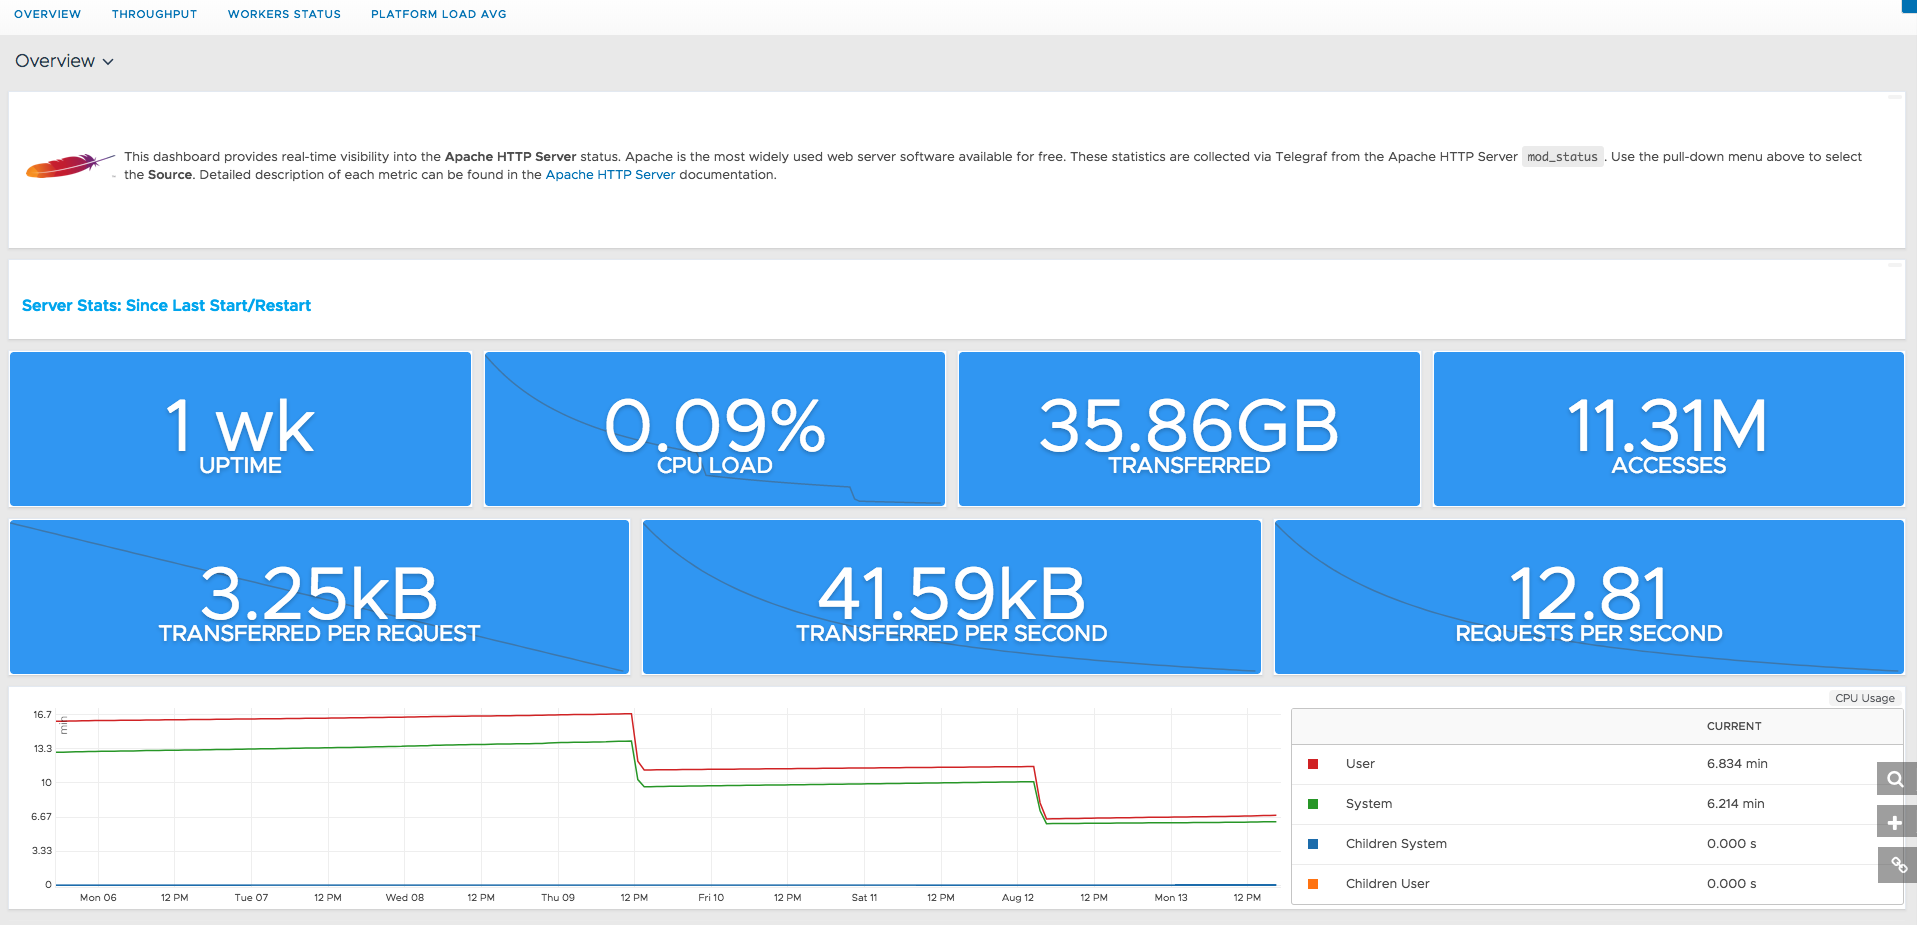 images/apache-dashboard-1.png